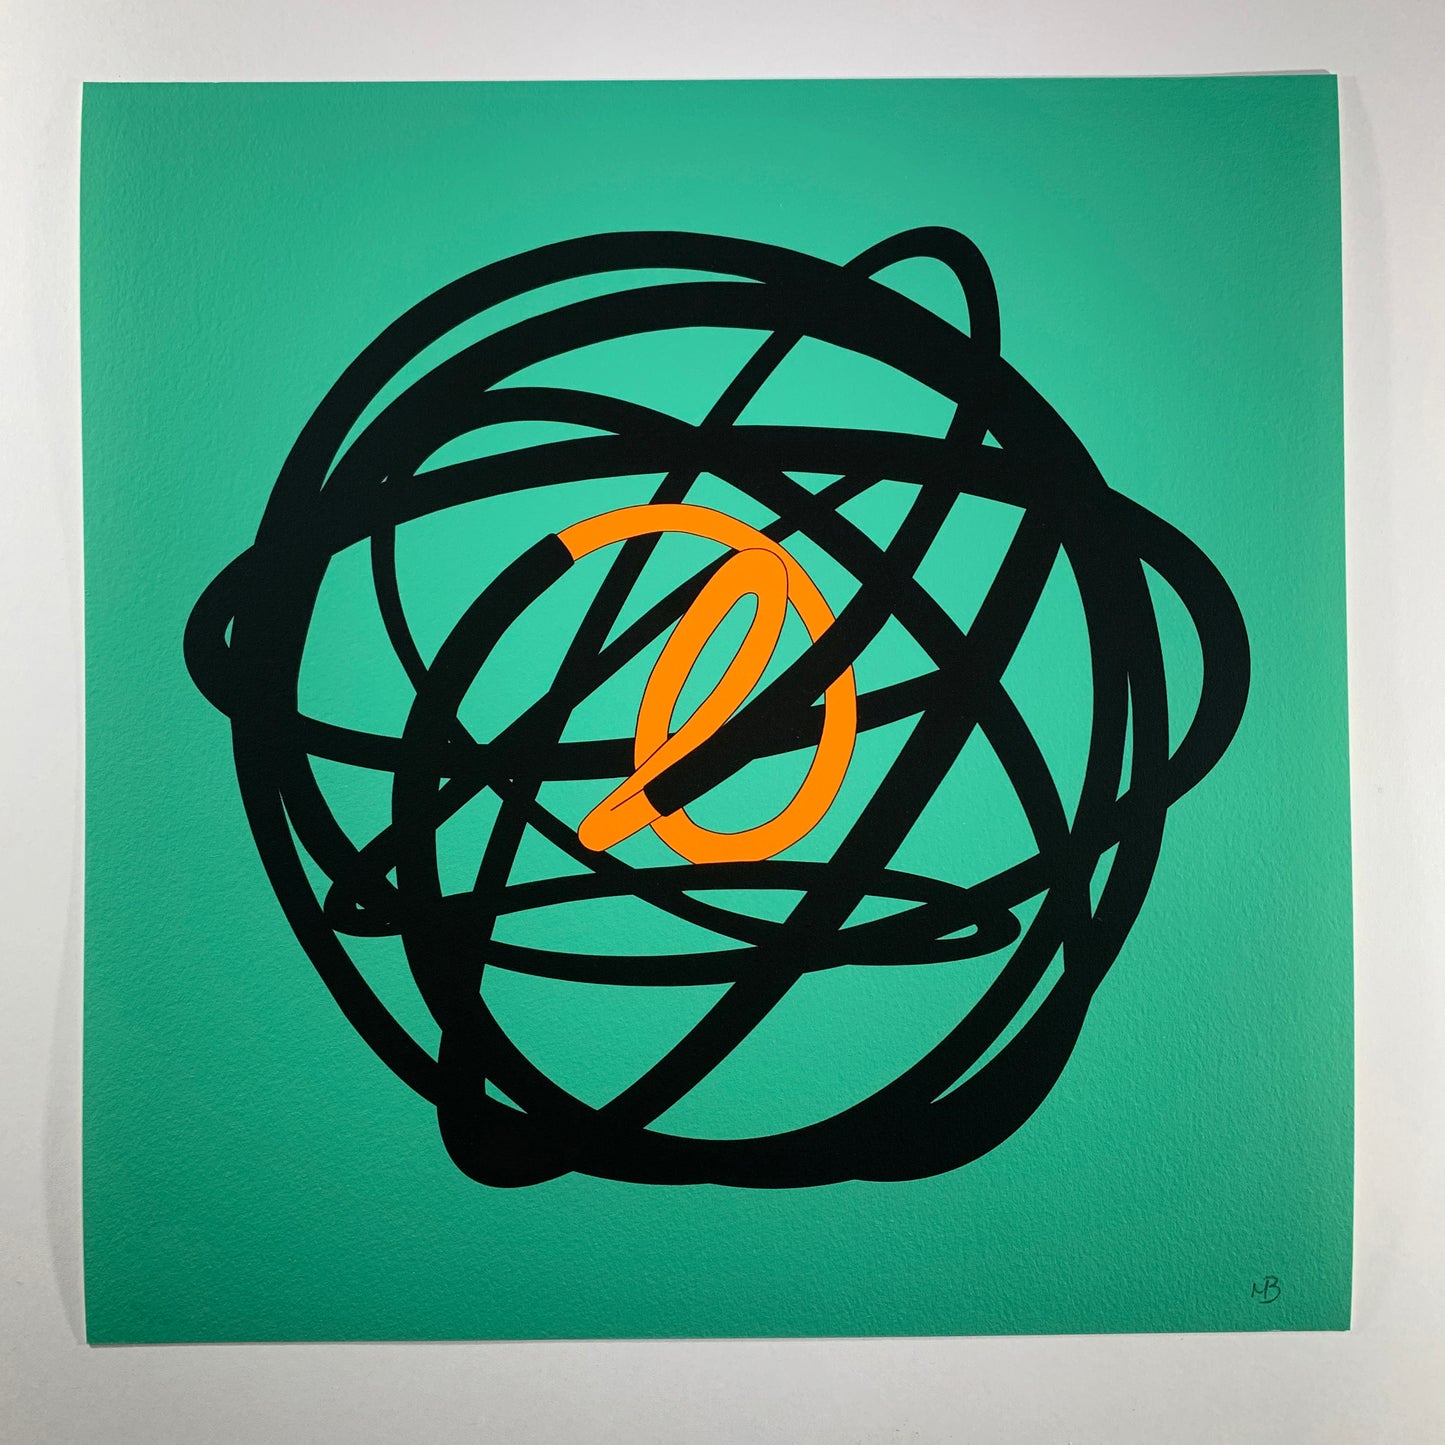 dd a burst of color to your art collection with Mark Beattie's Neon Globe (Orange and Green). This limited edition Giclée print on 310gsm Hahnemühle German Etching paper, measuring 30 x 30 cm, is part of an exclusive edition of 30. Elevate your space with the captivating interplay of colors and forms, where artistic precision meets limited edition exclusivity.